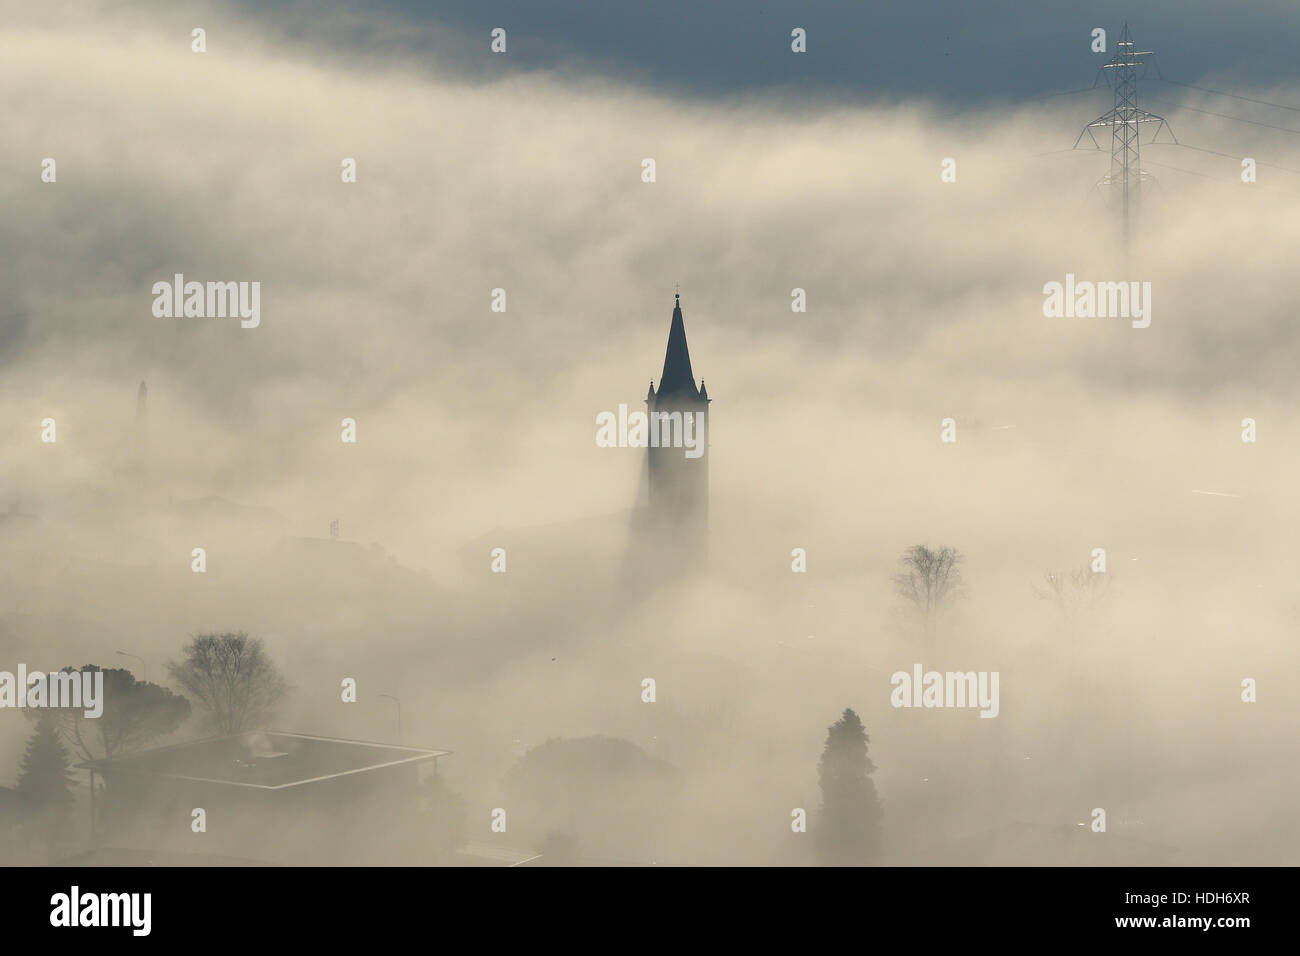 Aerial view of power lines, pylons and church steeple peeking out of winter fog Stock Photo